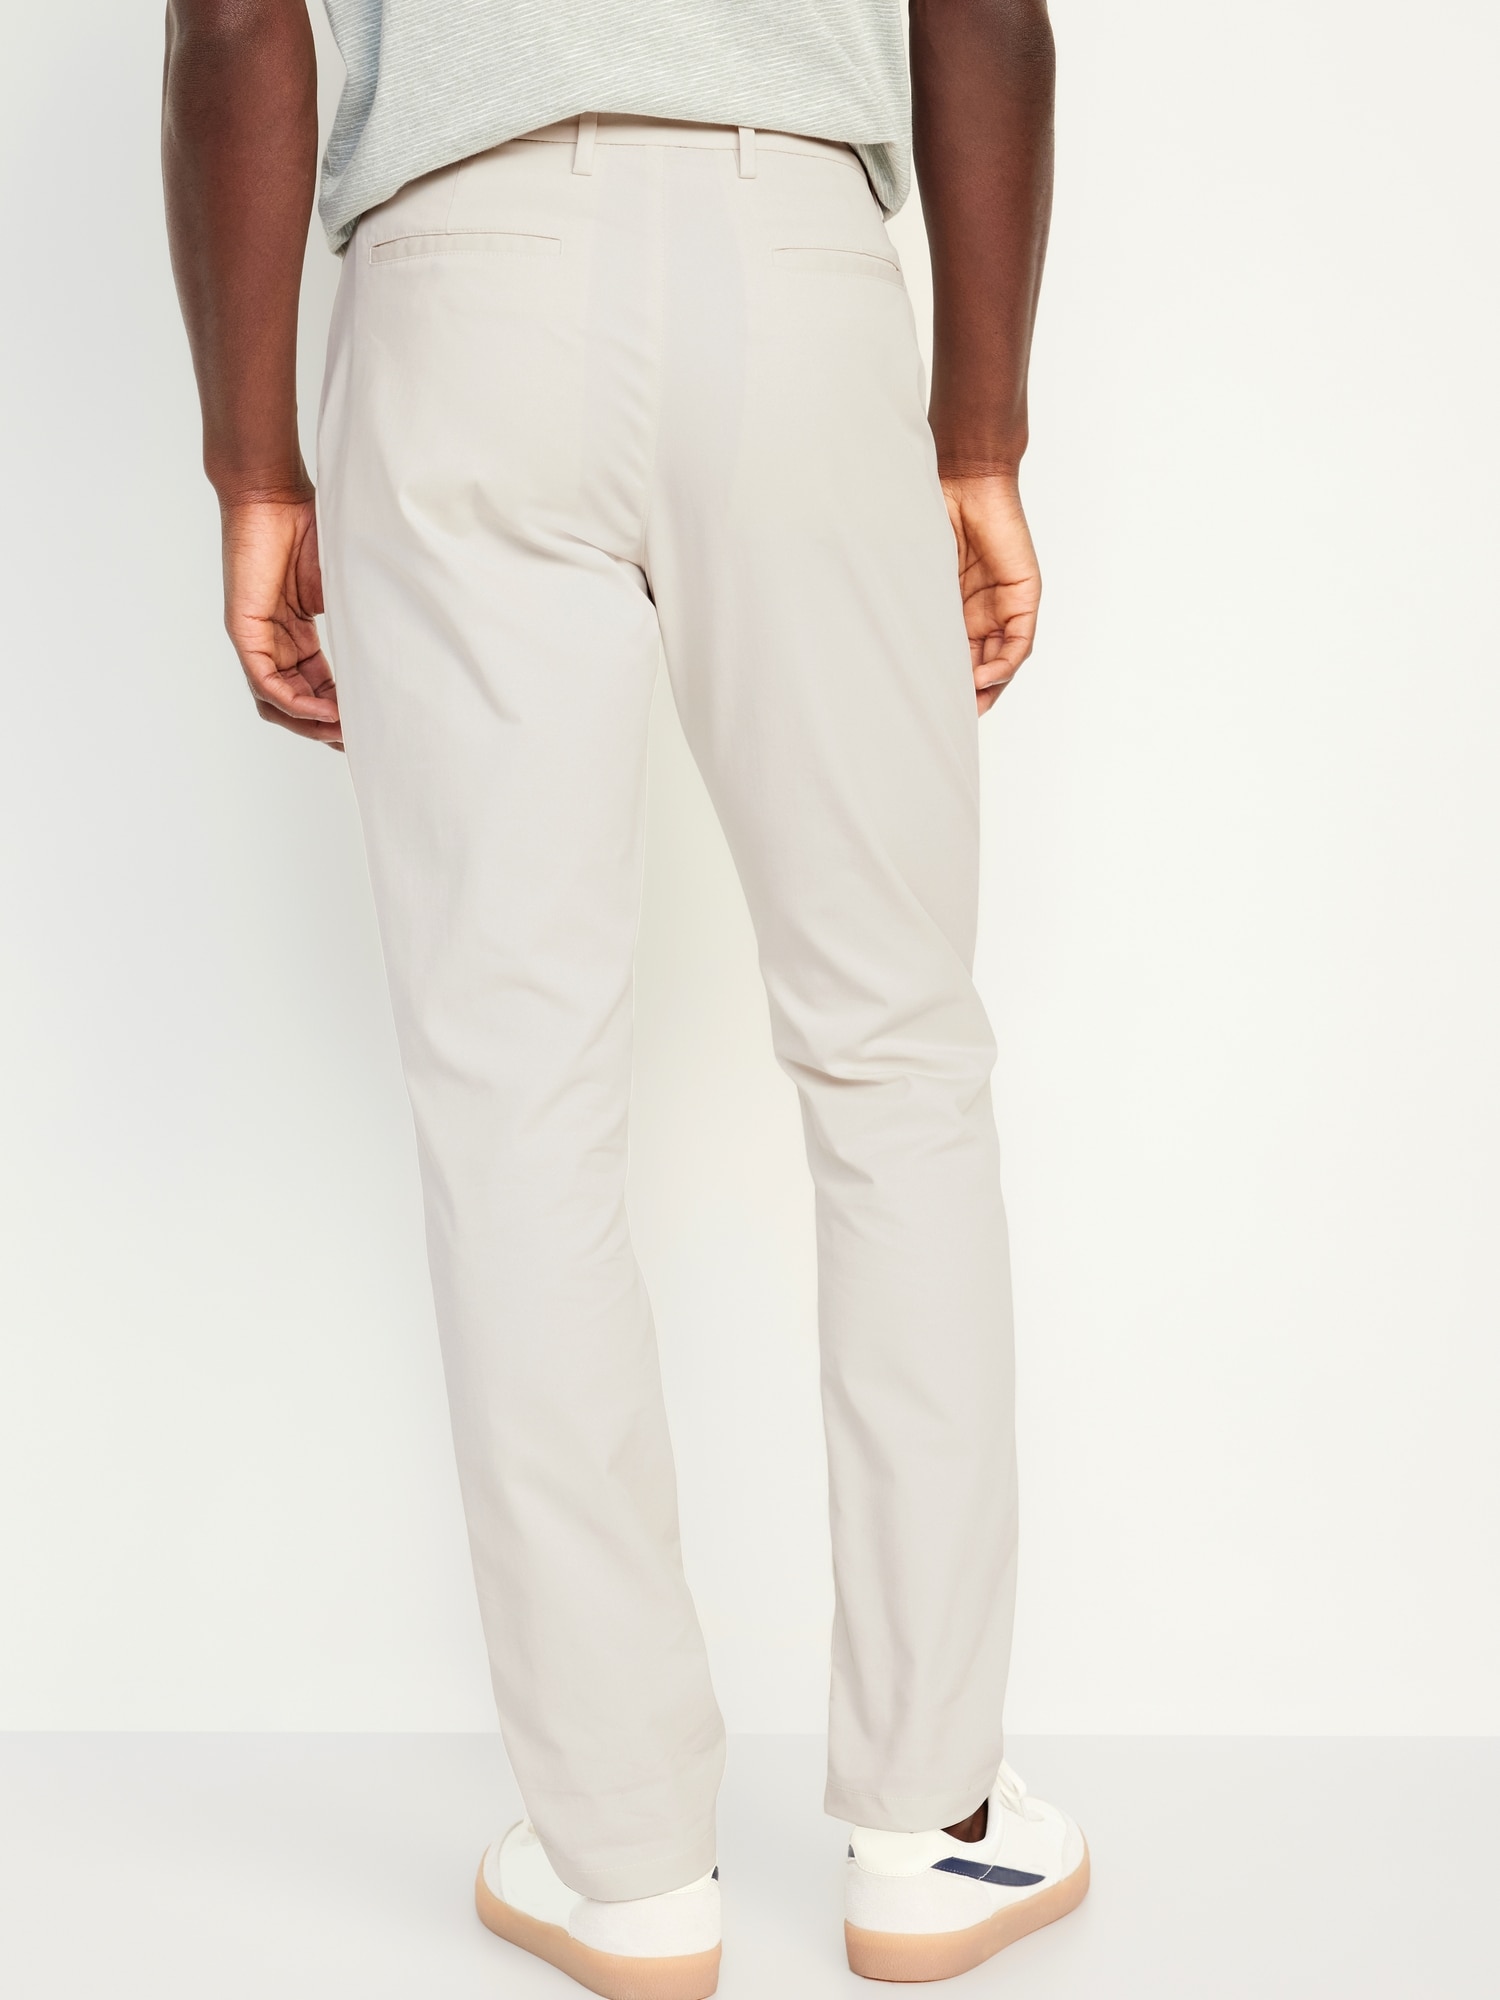 Lived-In Khakis in Skinny Fit with GapFlex | Gap Factory